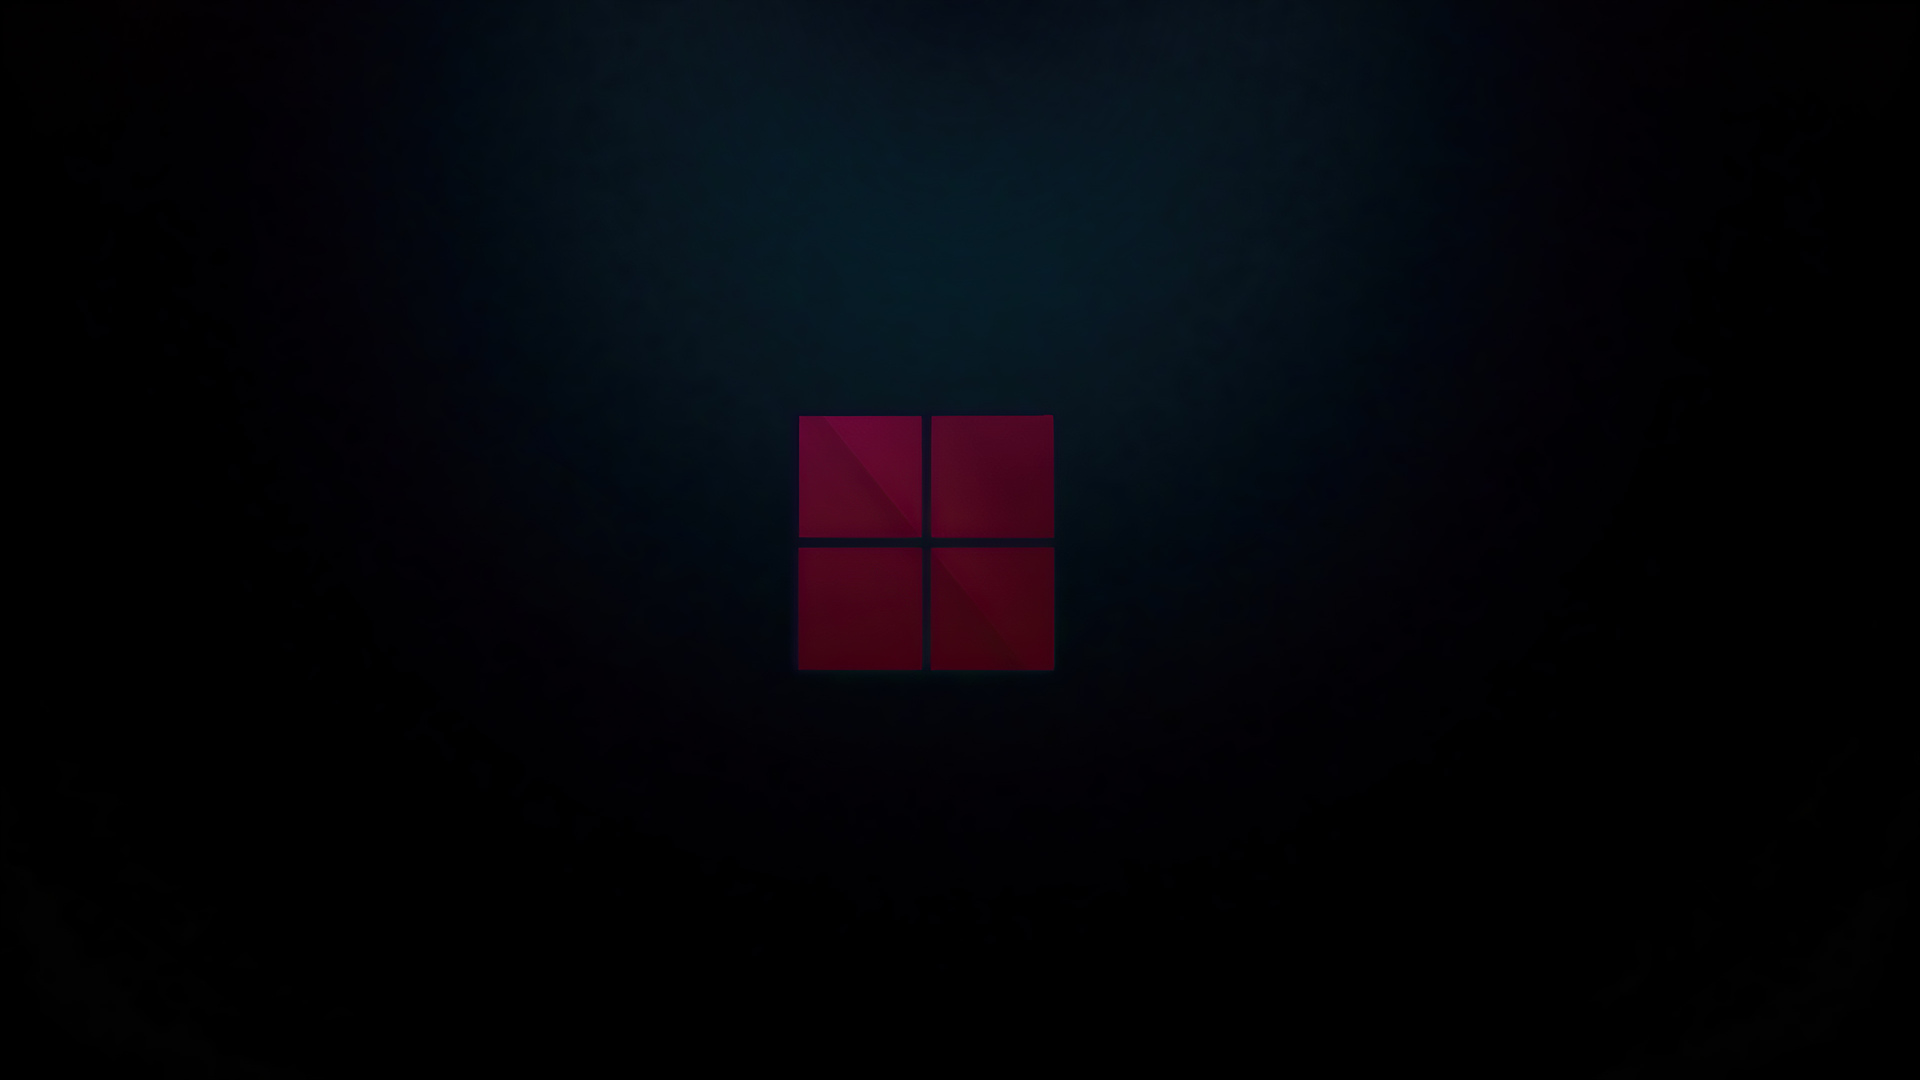 Windows 11 Wallpapers A completely new design with minimal approach  Apps